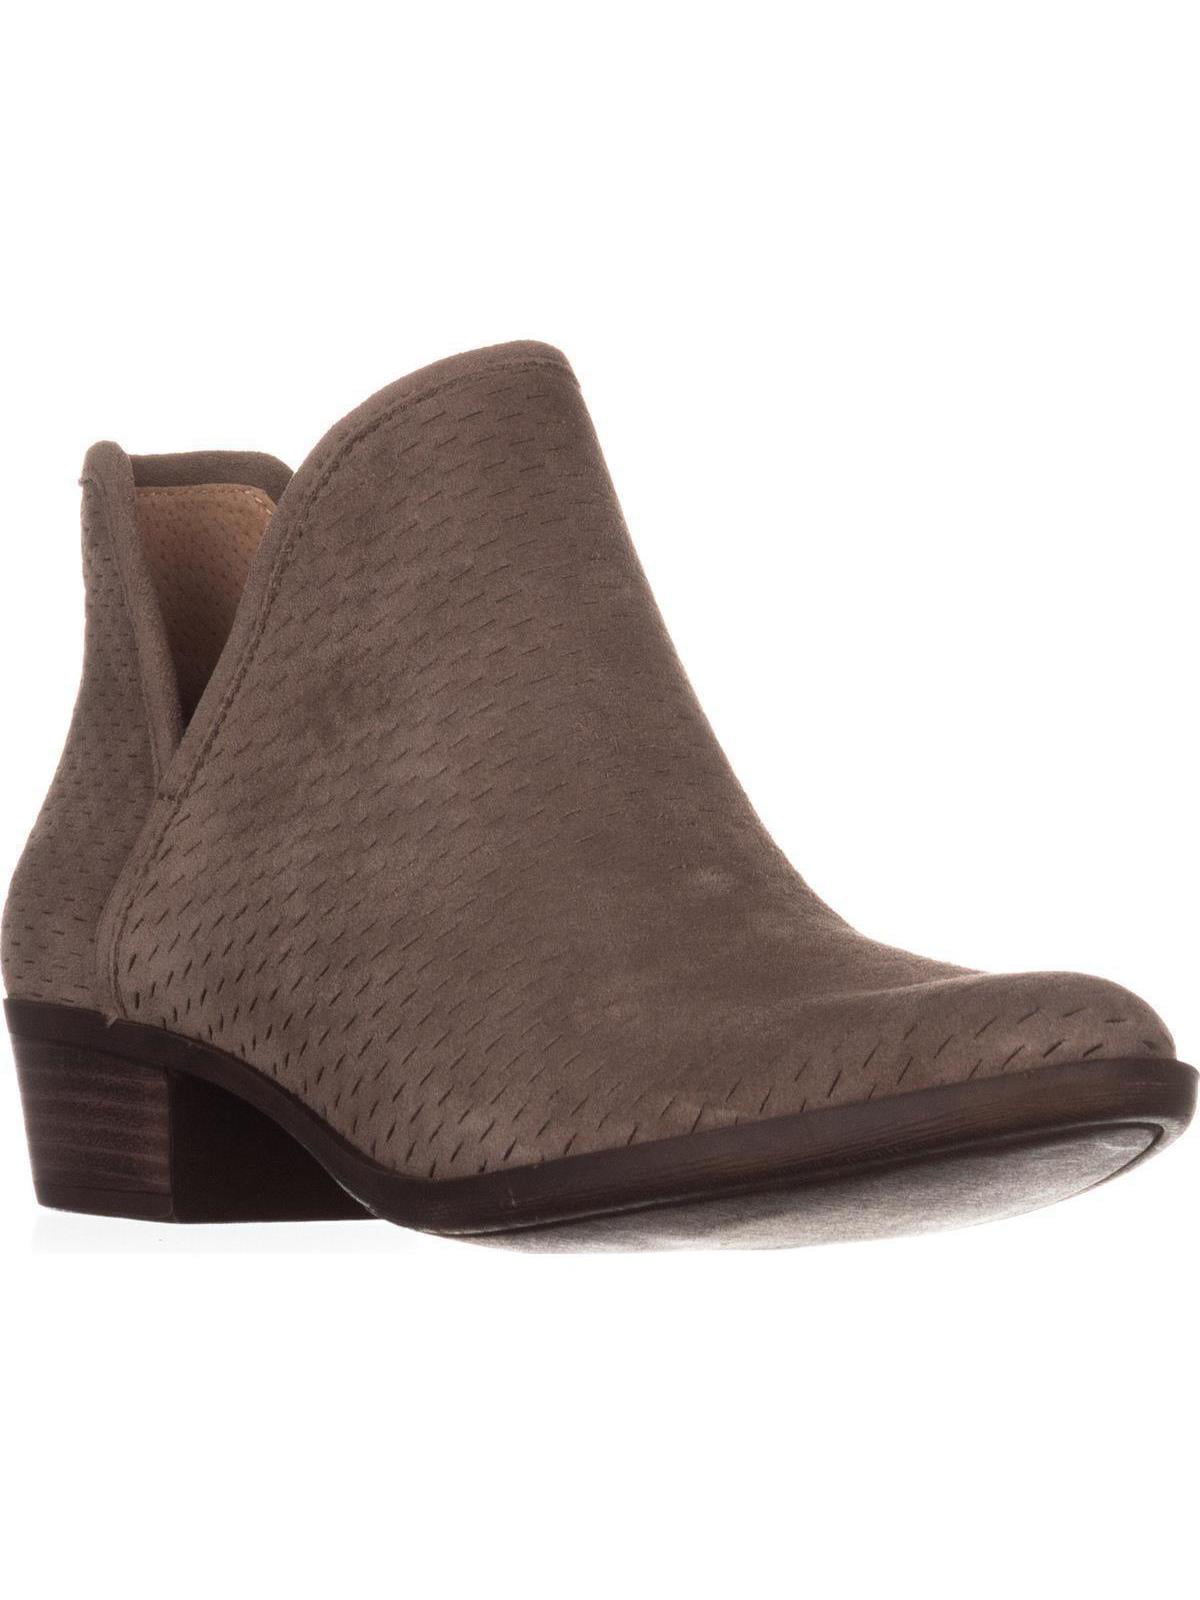 lucky brand suede ankle boots